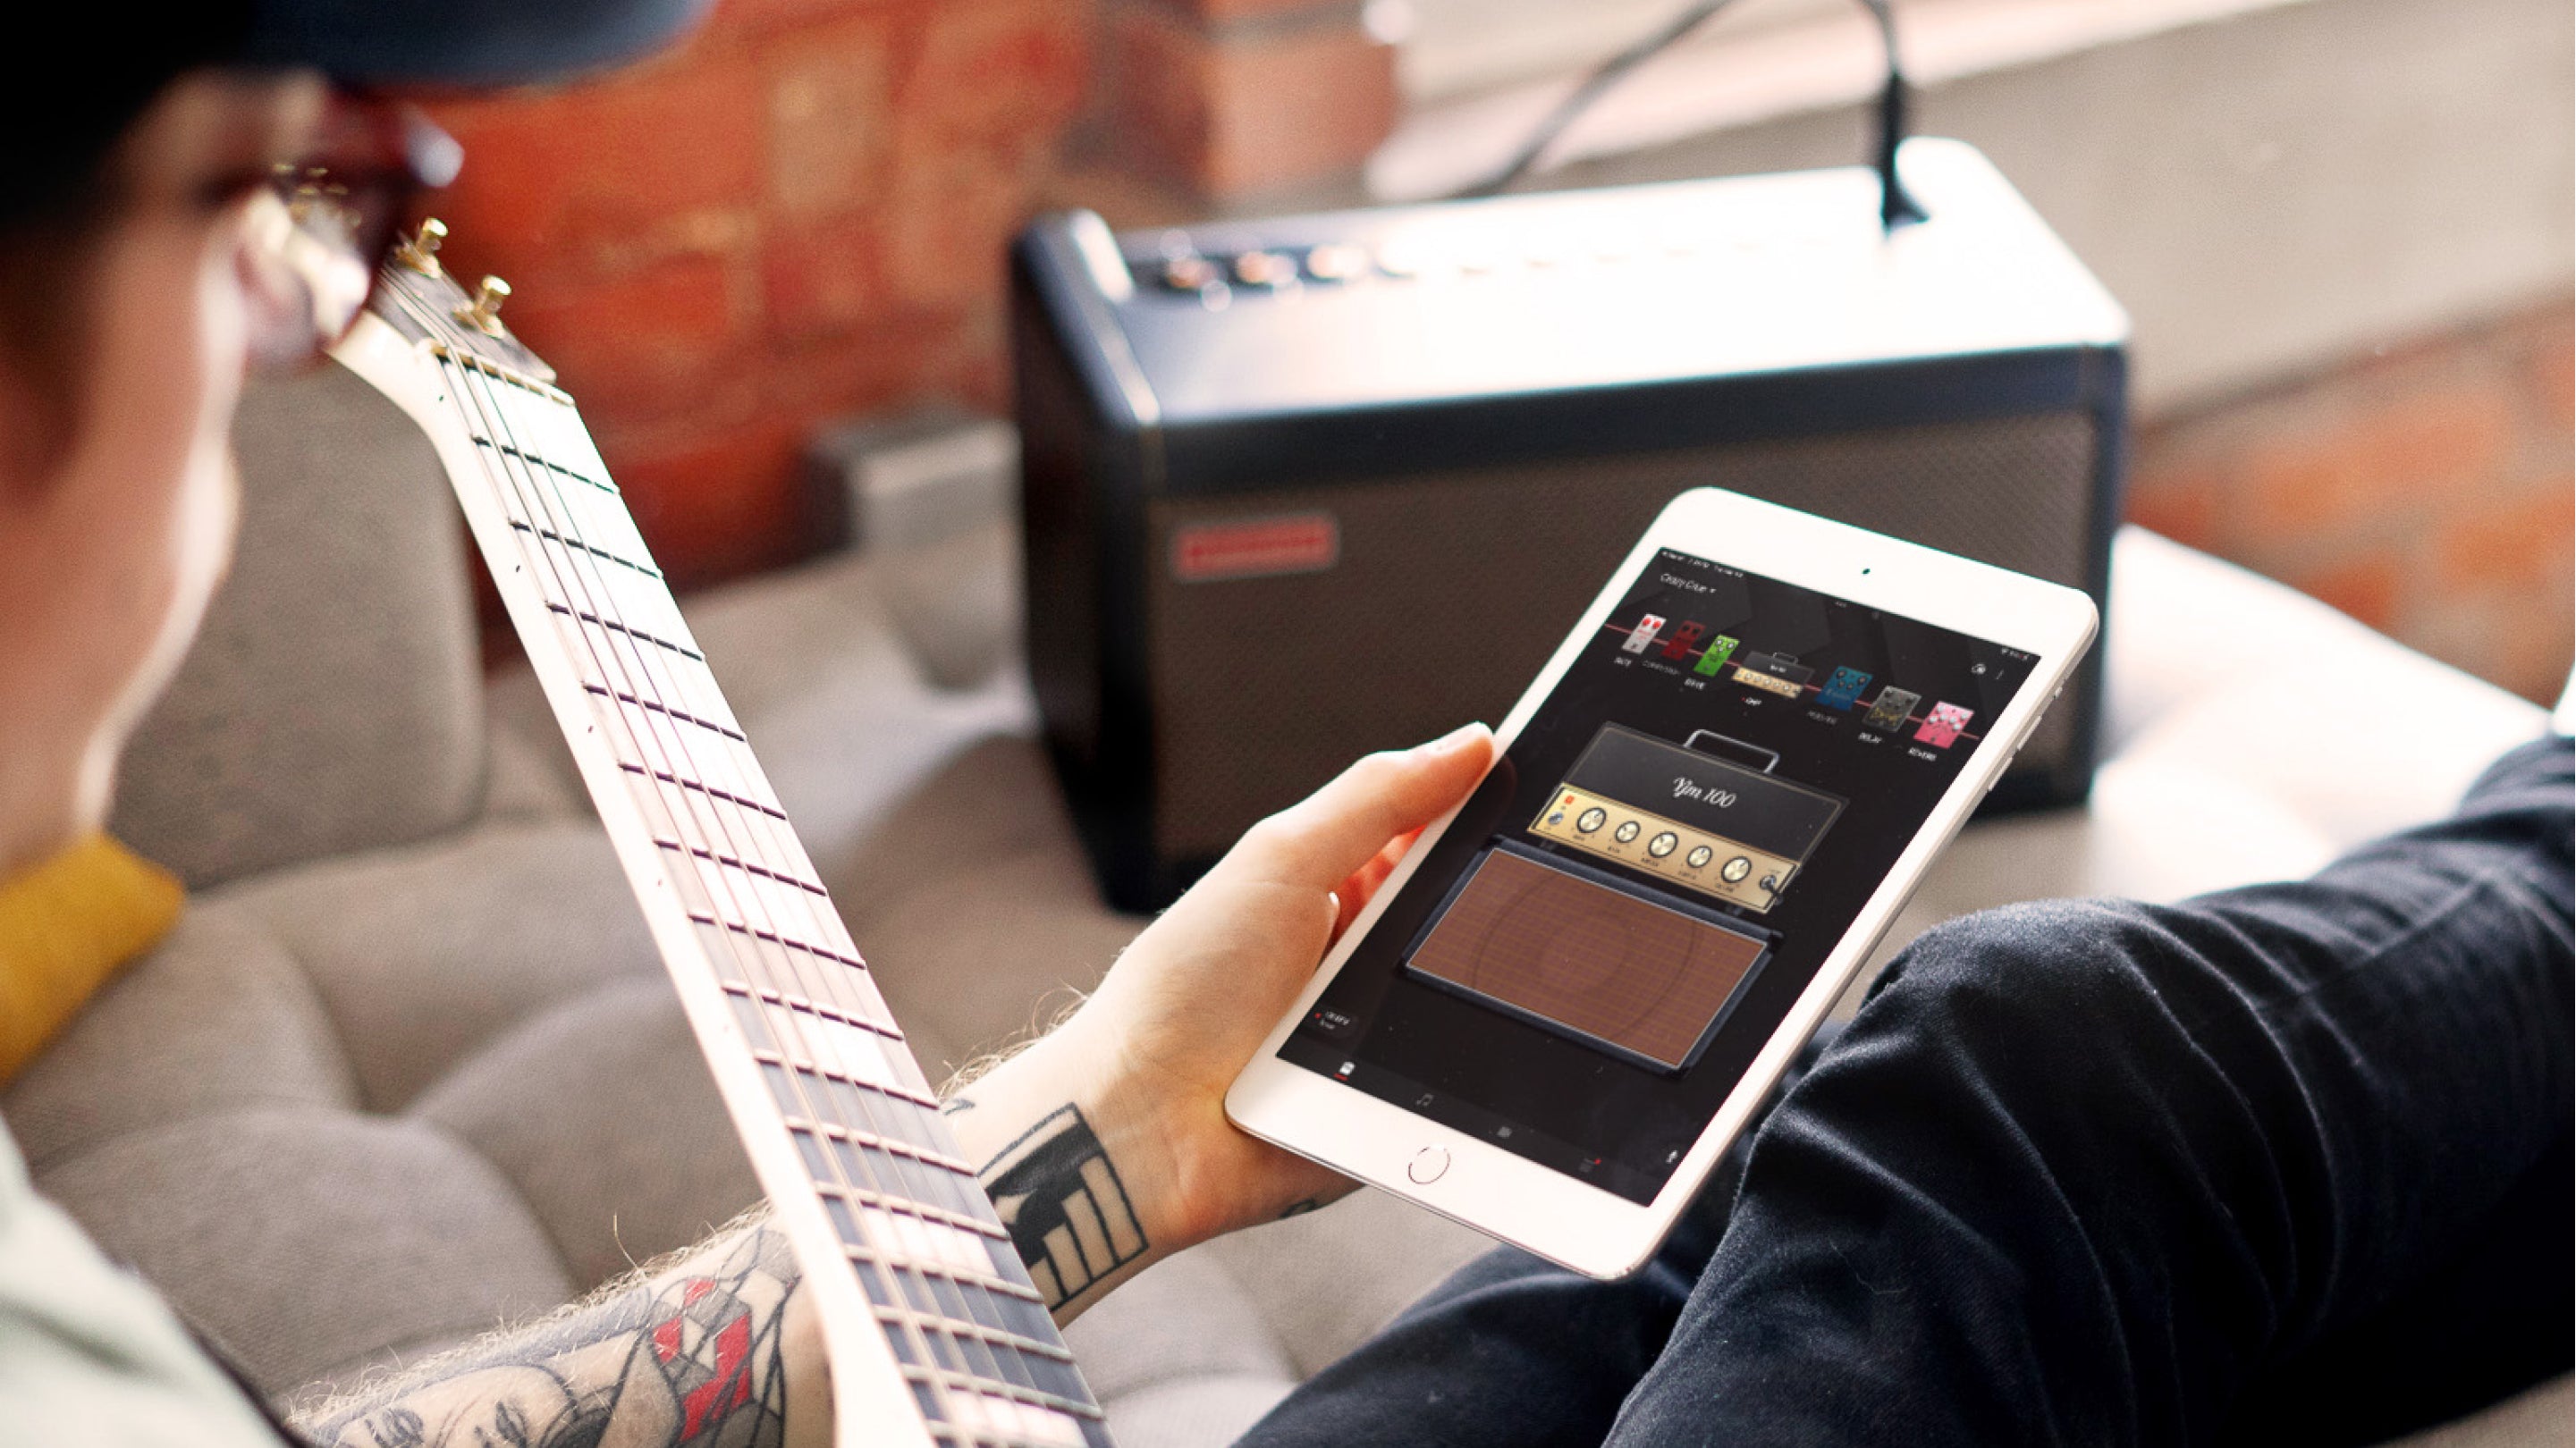 Positive Grid Unveils Spark Smart Guitar Amplifier and App Featuring  Intelligent Technology and Voice Control